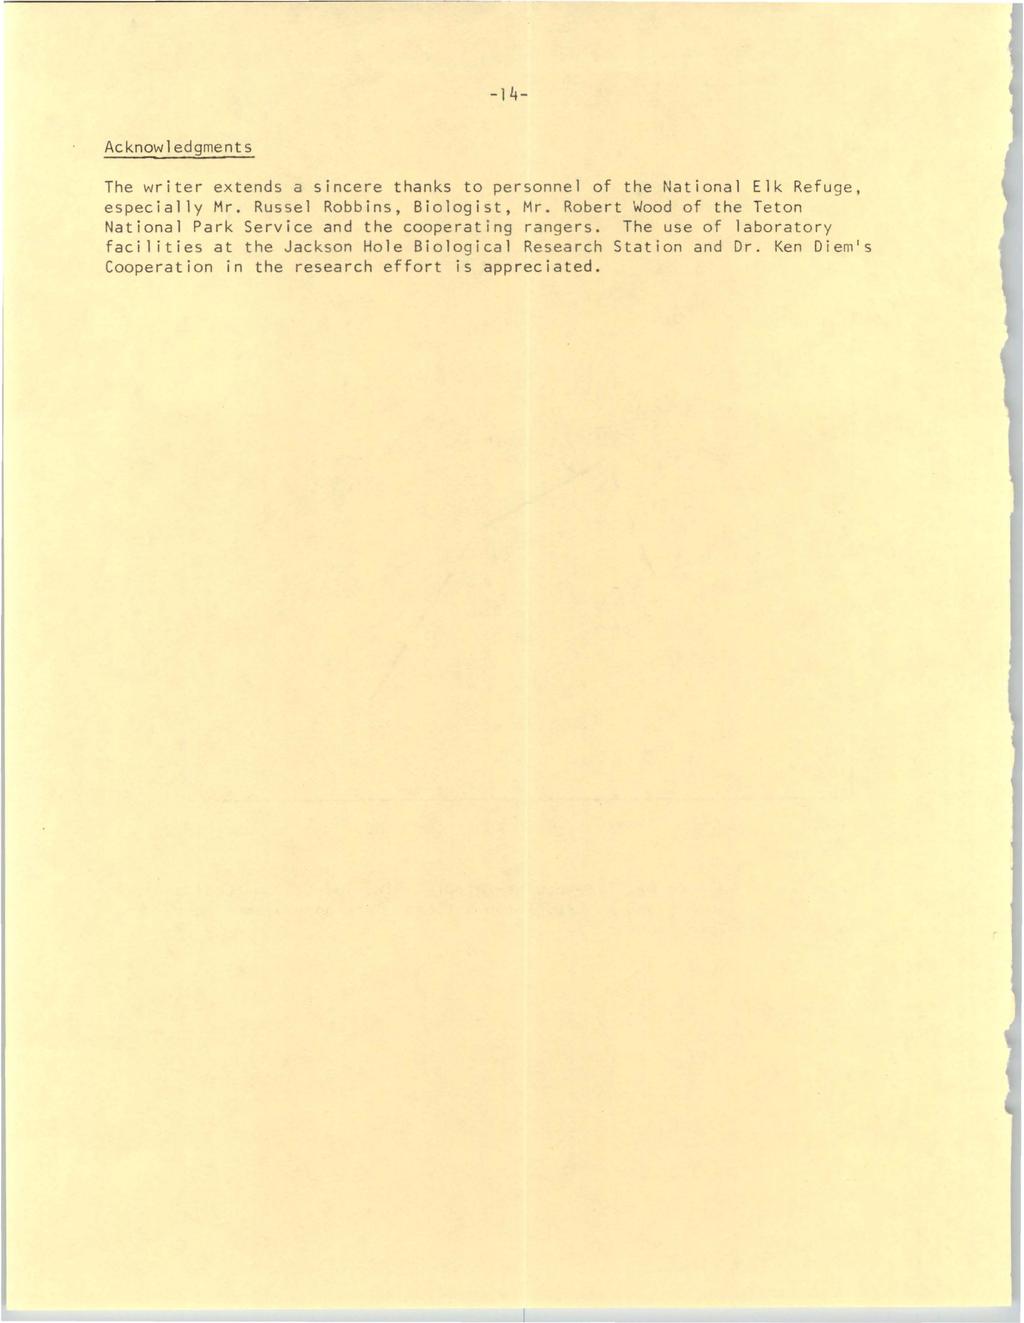 University of Wyoming National Park Service Research Center Annual Report, Vol. 2 [1978], Art.